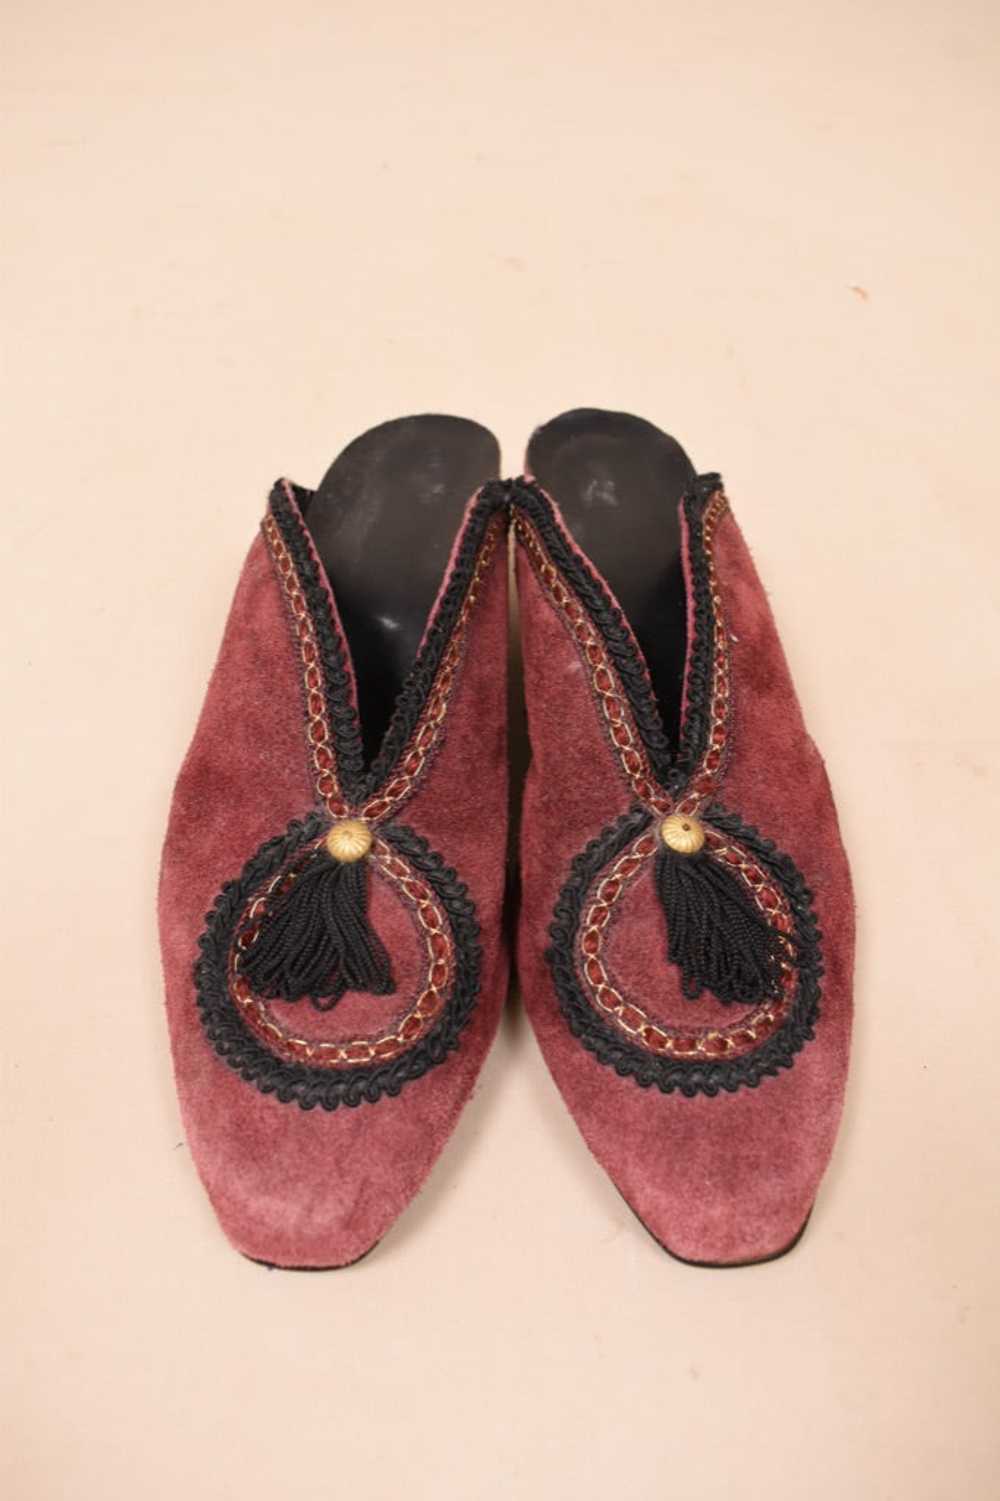 Red Suede Mules With Tassels, 8 - image 2